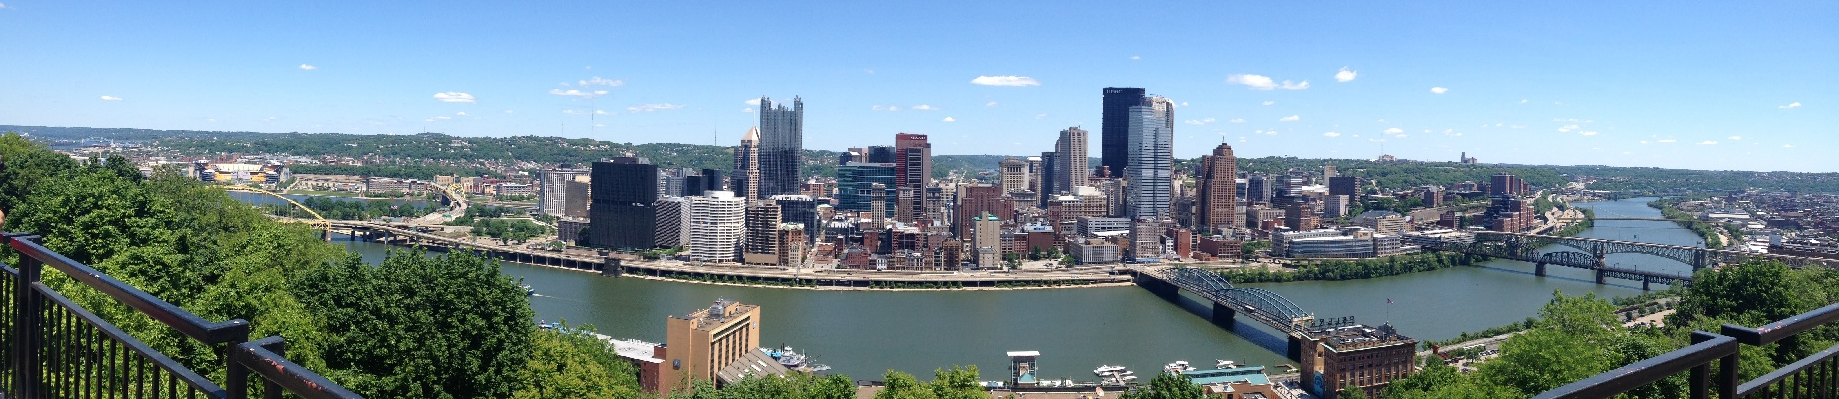 Panoramic view of Pittsburgh's skyline during the day